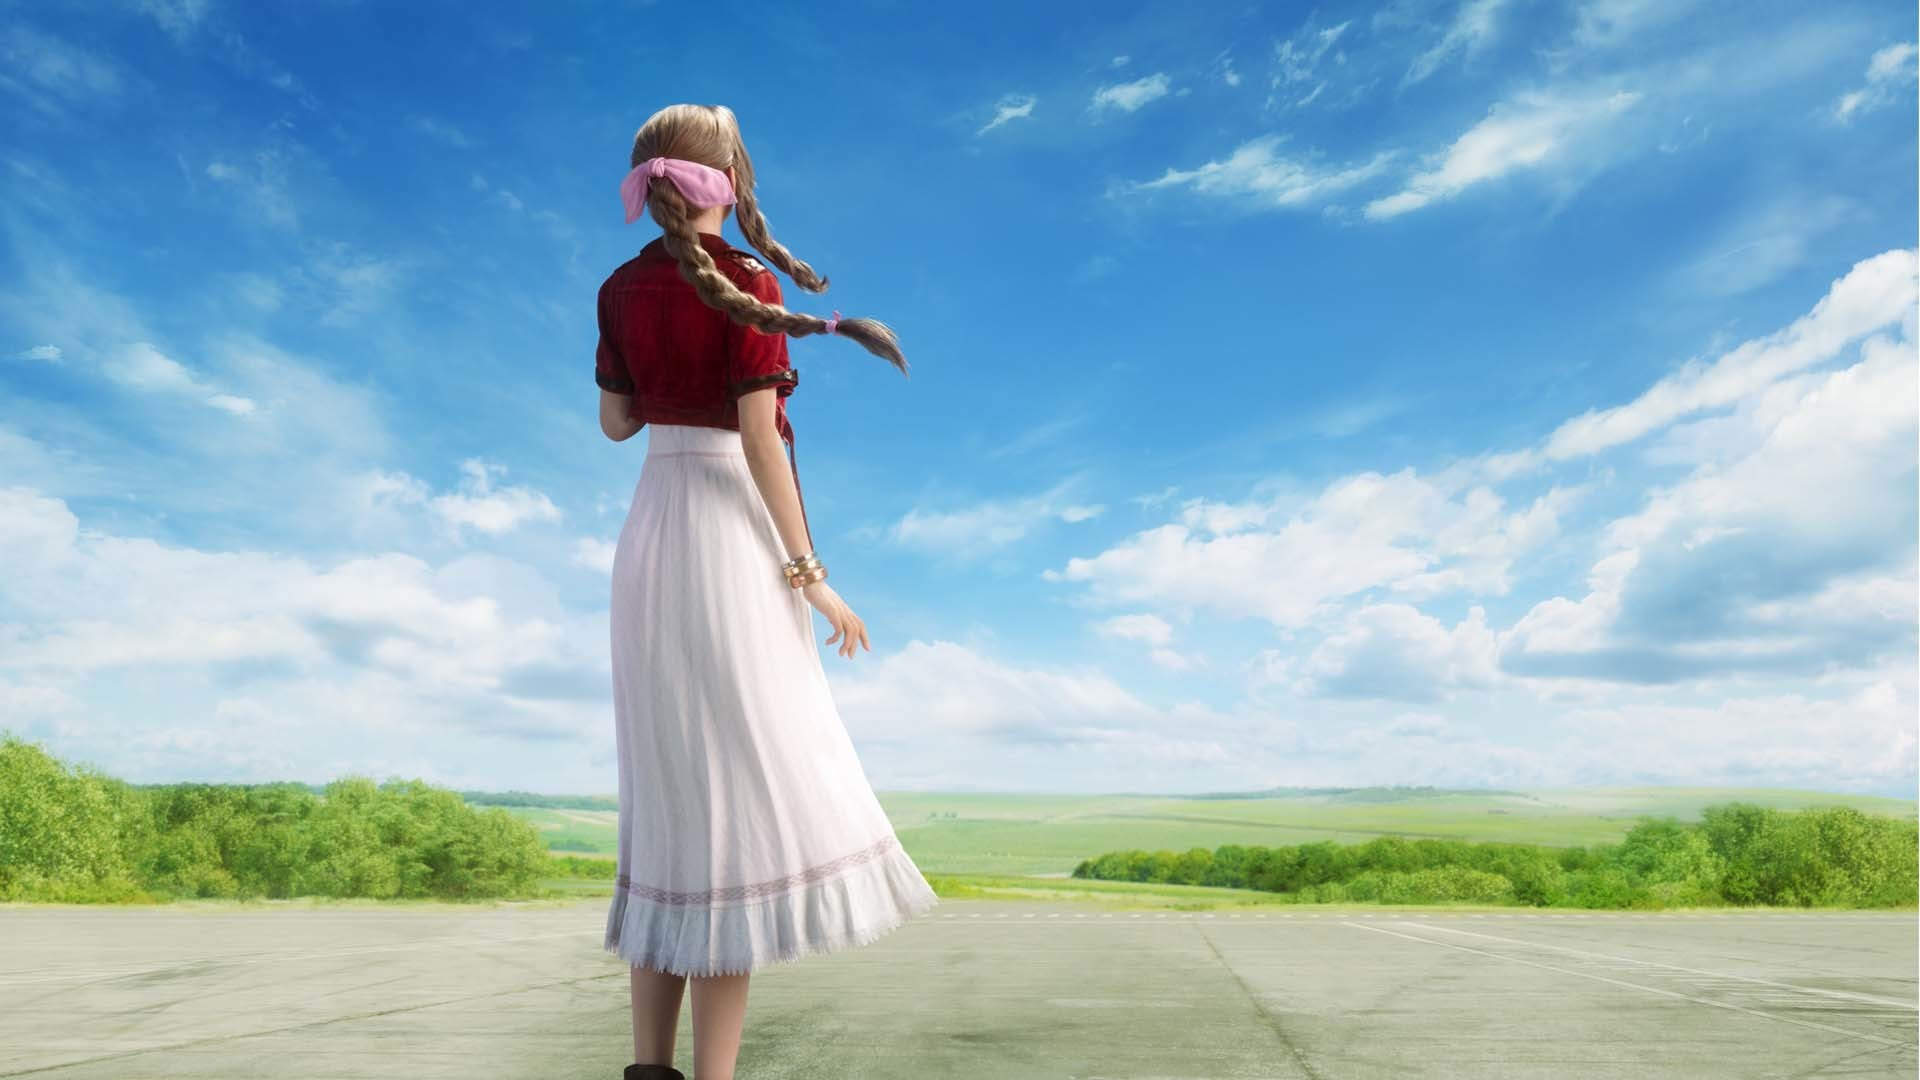 Aerith before a vast field in Final Fantasy 7